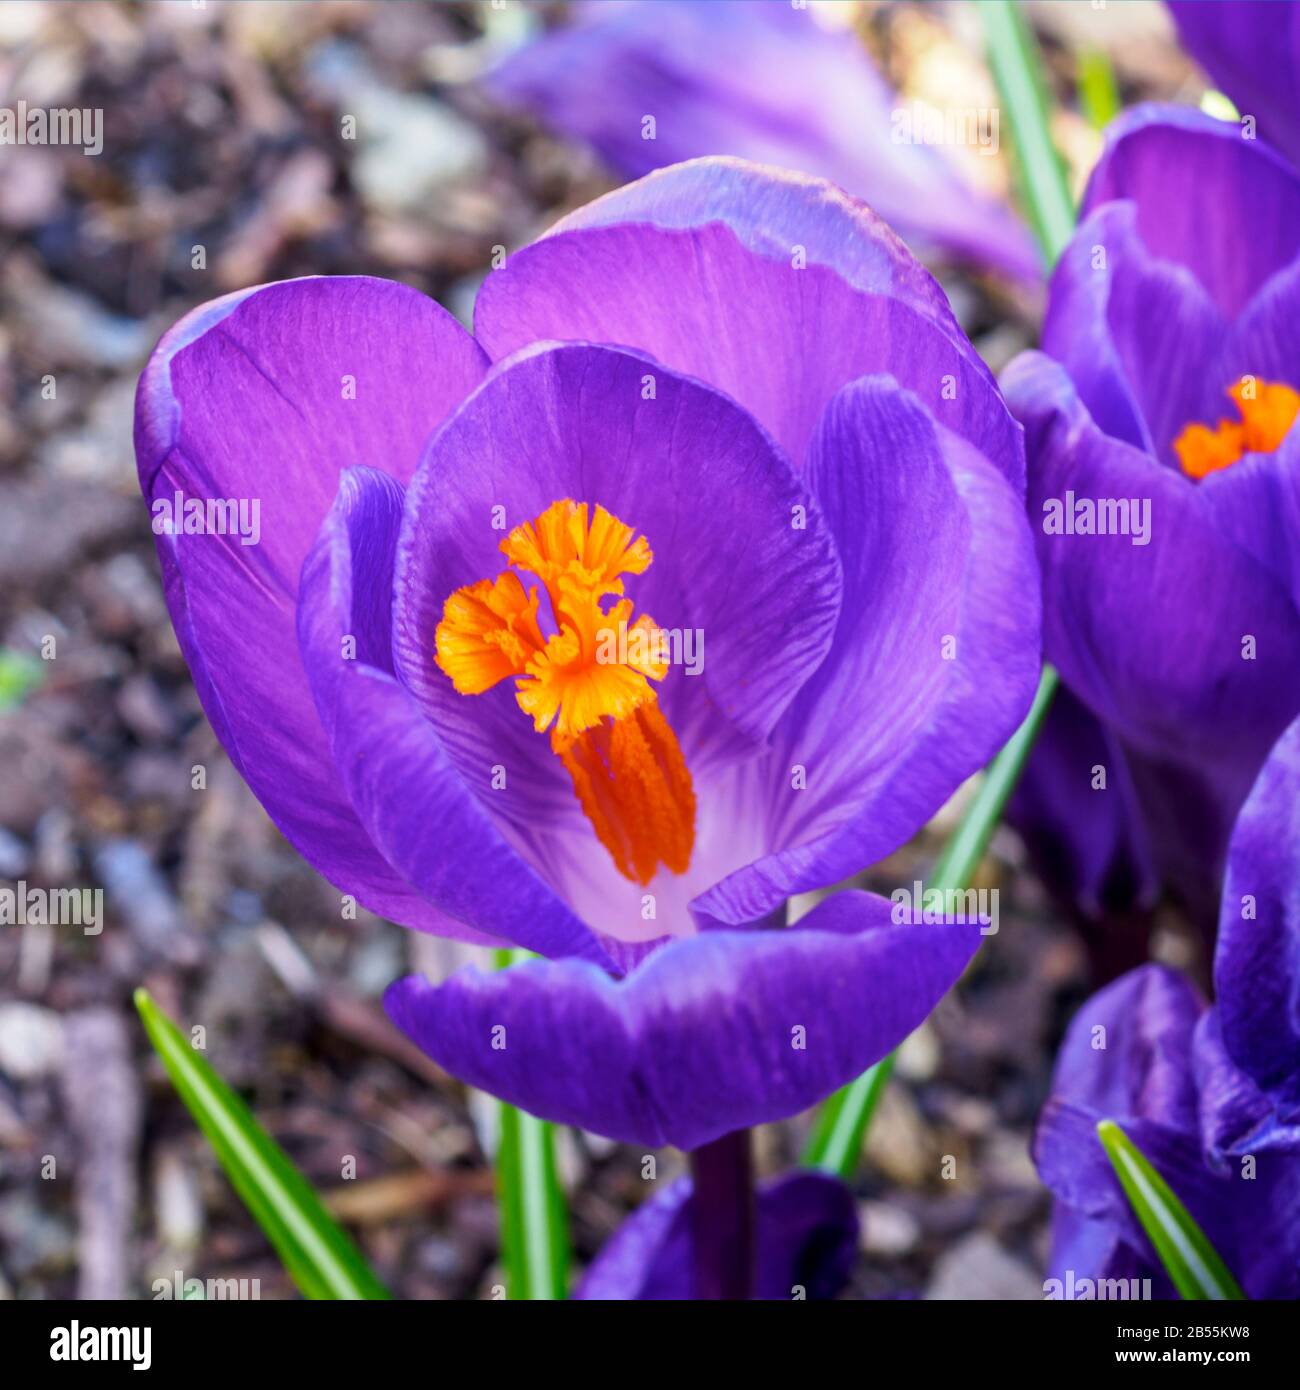 Closeup of a purple crocus flower with bright yellow stamens and anthers Stock Photo